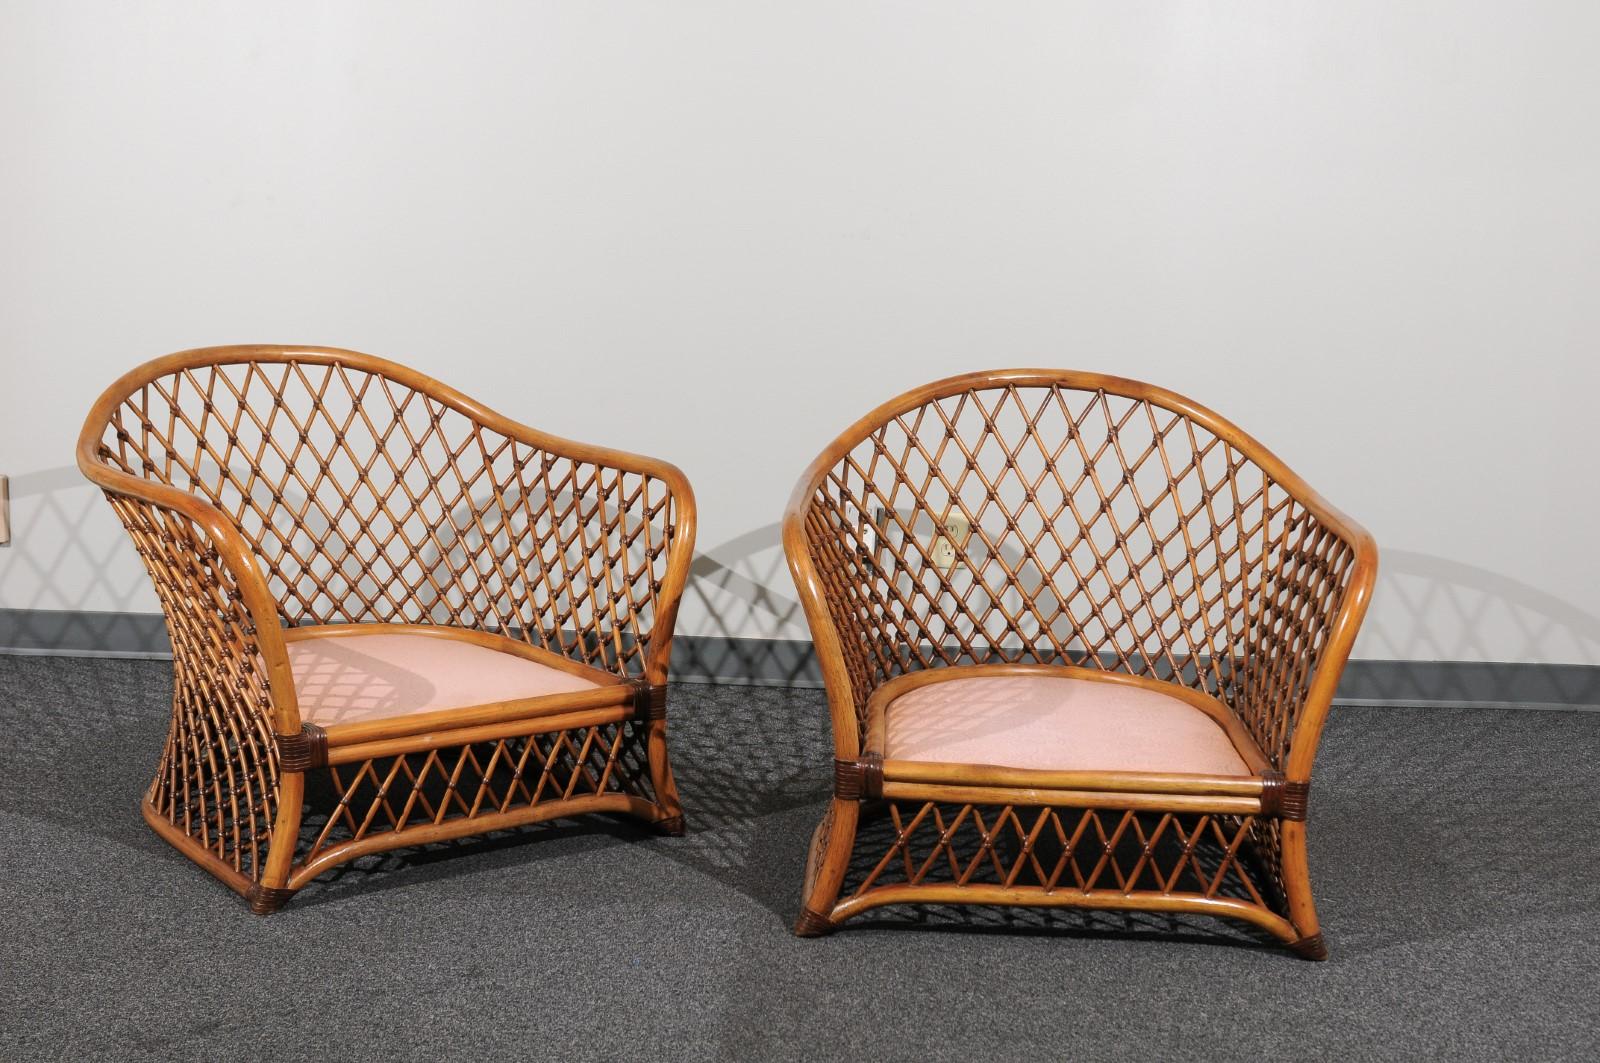 An exceptional restored pair of large scale vintage rattan club chairs. Stunning sculptural form with intricate lattice detail. Accents and bindings in Chocolate leather. Stellar design and craftsmanship. Fabulous room-defining pieces designed to